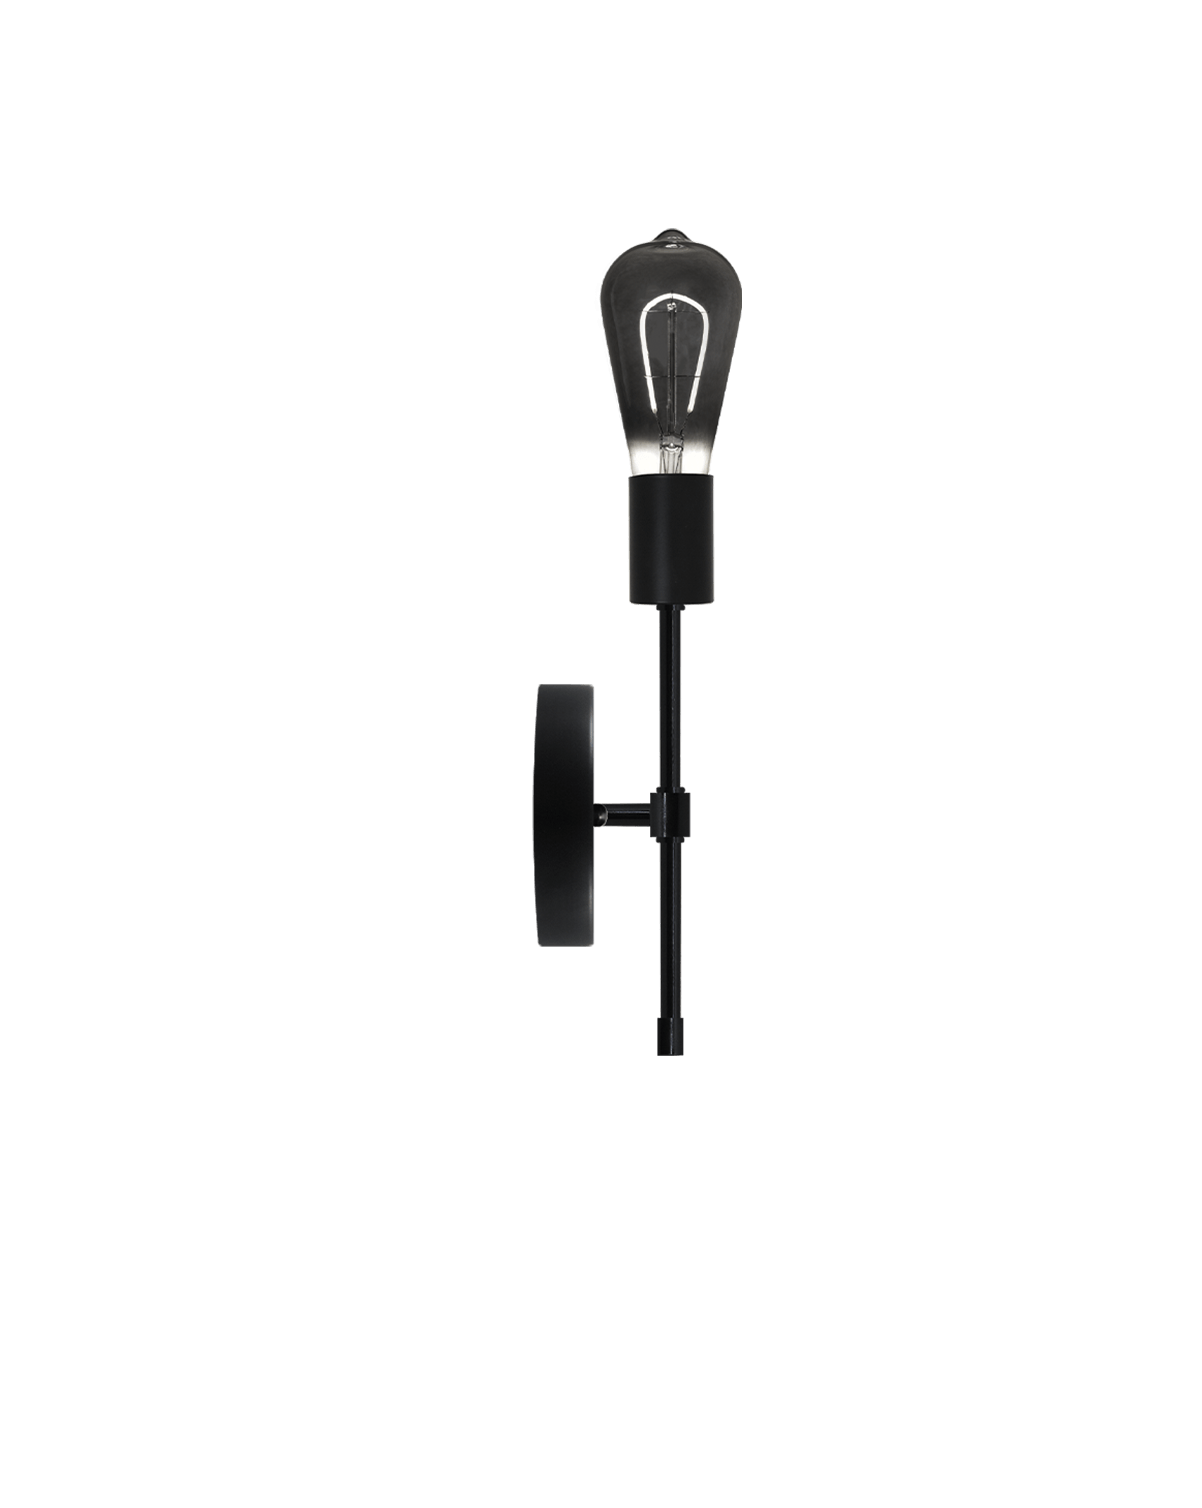 Torch Wall Sconce: Black with Smoke